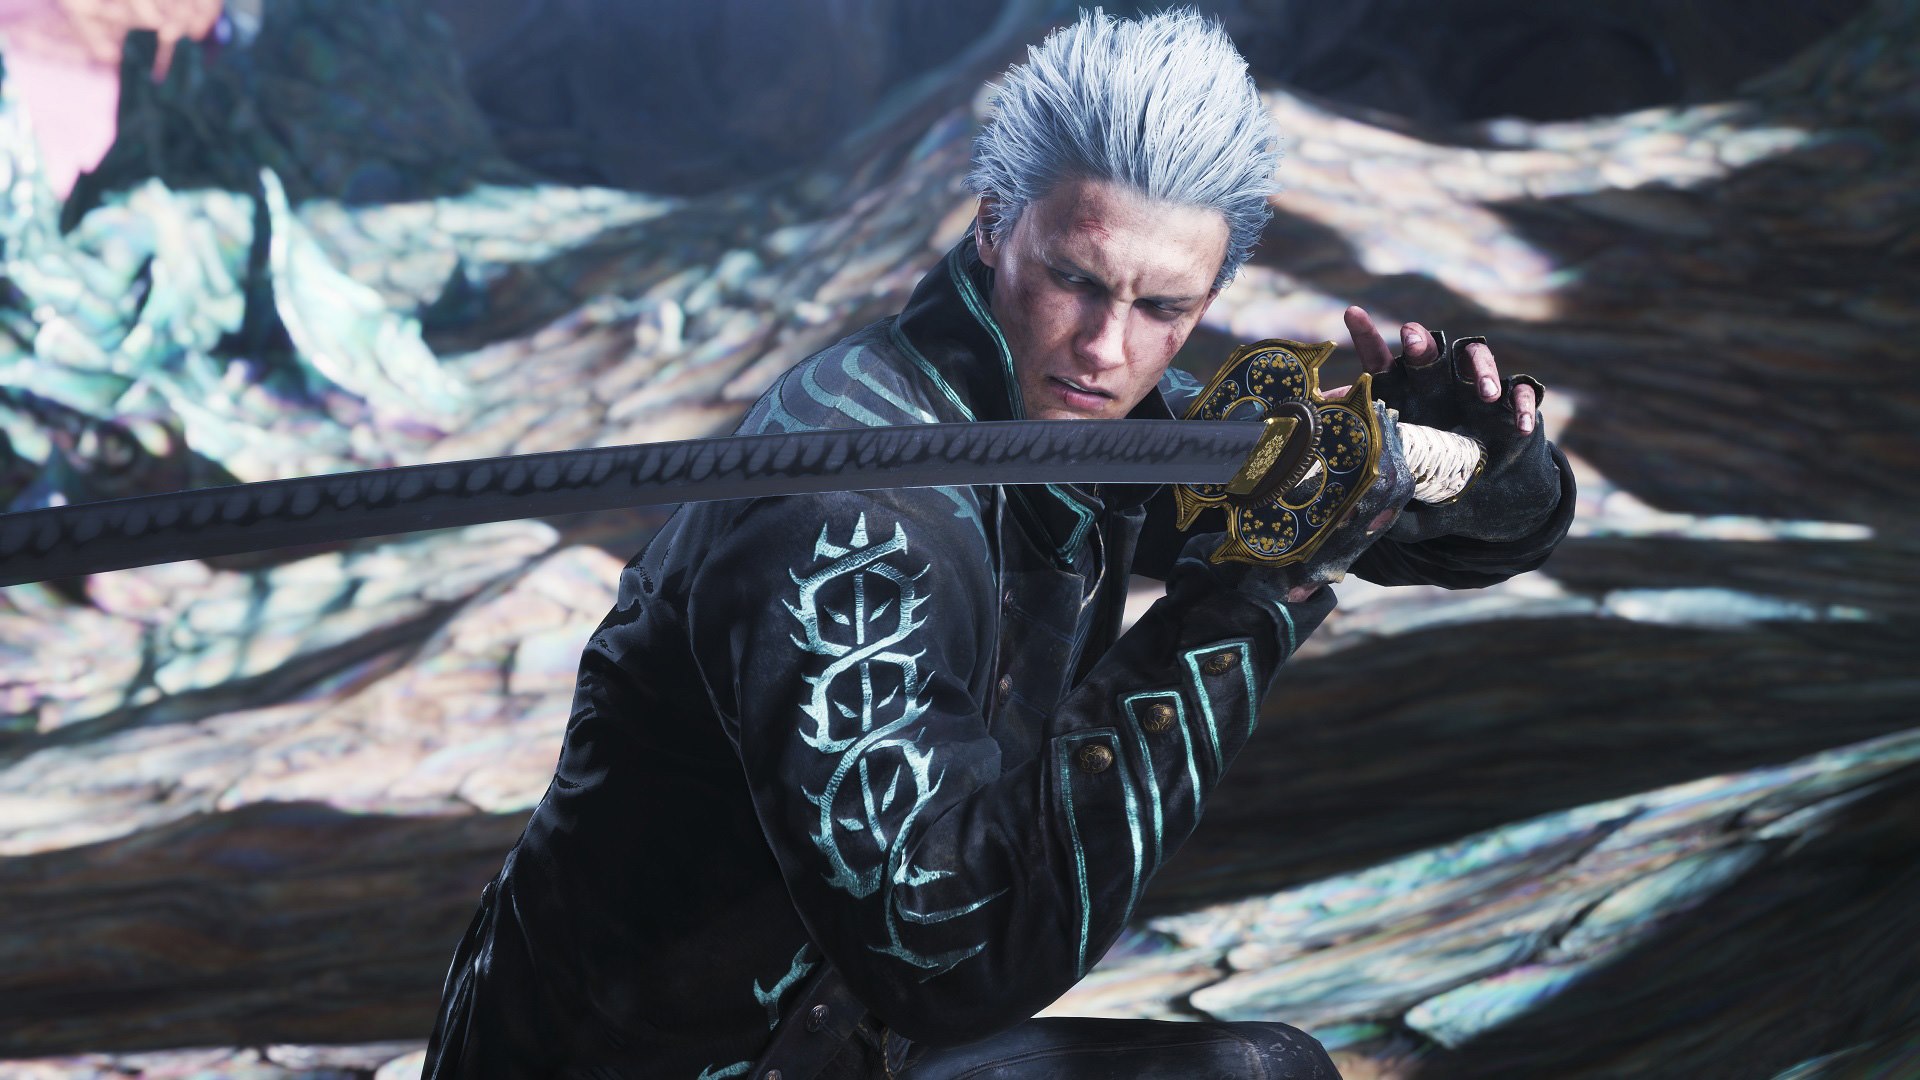 Devil May Cry 5 Ps4 And Xbox One Versions Gets Vergil Dlc Too Sirus Gaming